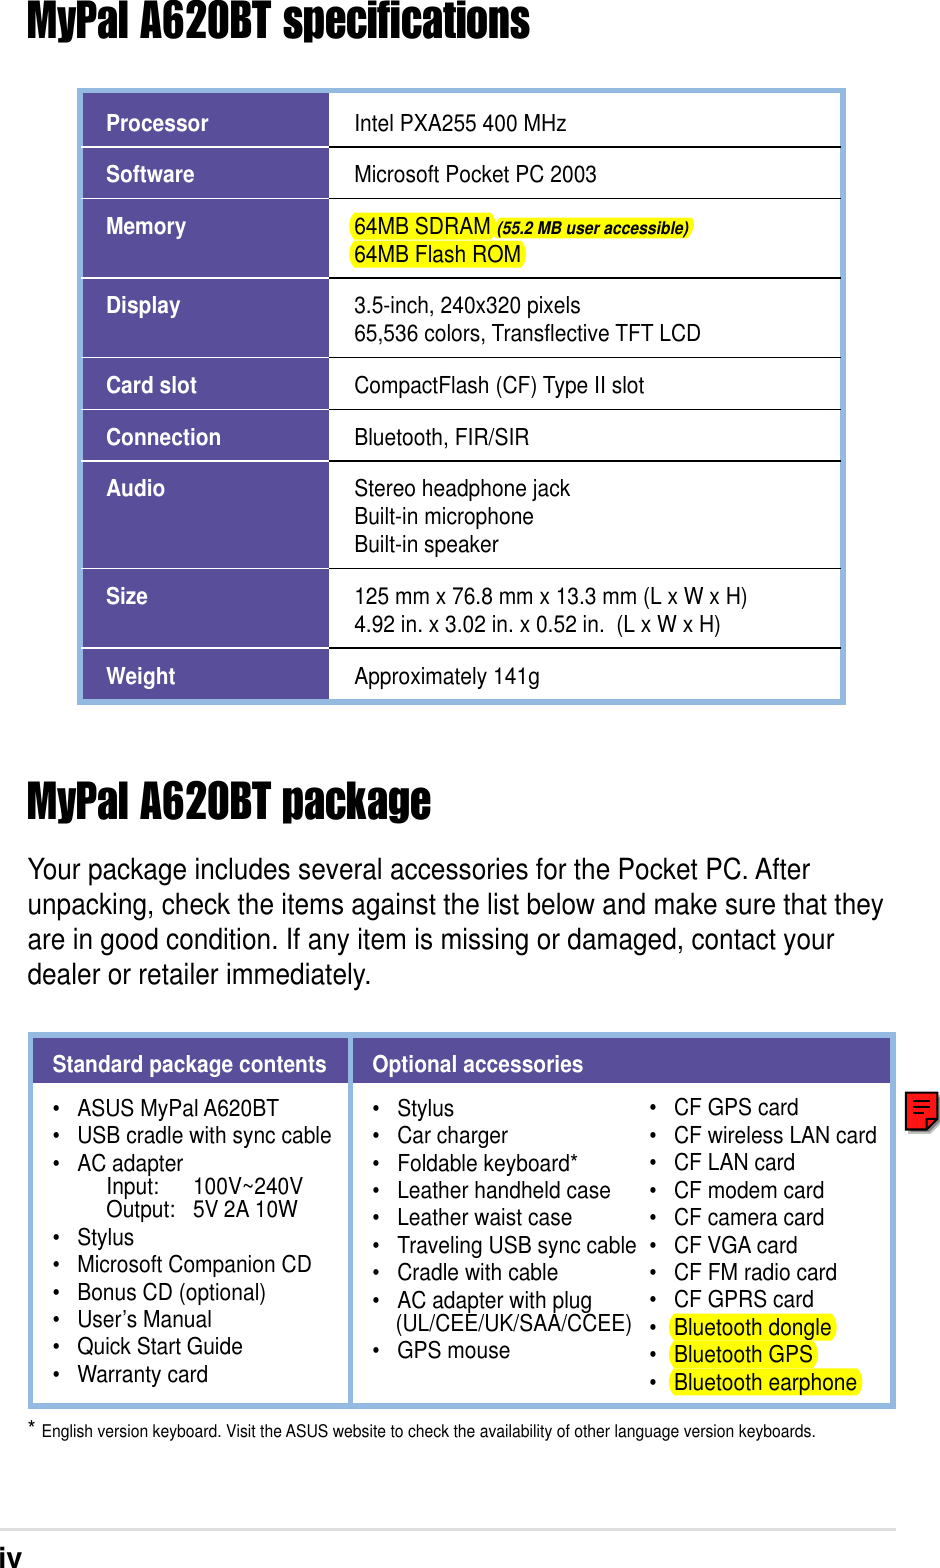 ivMyPal A620BT specificationsMyPal A620BT packageYour package includes several accessories for the Pocket PC. Afterunpacking, check the items against the list below and make sure that theyare in good condition. If any item is missing or damaged, contact yourdealer or retailer immediately.ProcessorSoftwareMemoryDisplayCard slotConnectionAudioSizeWeightIntel PXA255 400 MHzMicrosoft Pocket PC 200364MB SDRAM (55.2 MB user accessible)64MB Flash ROM3.5-inch, 240x320 pixels65,536 colors, Transflective TFT LCDCompactFlash (CF) Type II slotBluetooth, FIR/SIRStereo headphone jackBuilt-in microphoneBuilt-in speaker125 mm x 76.8 mm x 13.3 mm (L x W x H)4.92 in. x 3.02 in. x 0.52 in.  (L x W x H)Approximately 141g* English version keyboard. Visit the ASUS website to check the availability of other language version keyboards.Standard package contents• ASUS MyPal A620BT• USB cradle with sync cable• AC adapter     Input: 100V~240V     Output: 5V 2A 10W• Stylus• Microsoft Companion CD• Bonus CD (optional)• User’s Manual• Quick Start Guide• Warranty cardOptional accessories• Stylus• Car charger• Foldable keyboard*• Leather handheld case• Leather waist case• Traveling USB sync cable• Cradle with cable• AC adapter with plug    (UL/CEE/UK/SAA/CCEE)• GPS mouse• CF GPS card• CF wireless LAN card• CF LAN card• CF modem card• CF camera card• CF VGA card• CF FM radio card• CF GPRS card• Bluetooth dongle• Bluetooth GPS• Bluetooth earphone